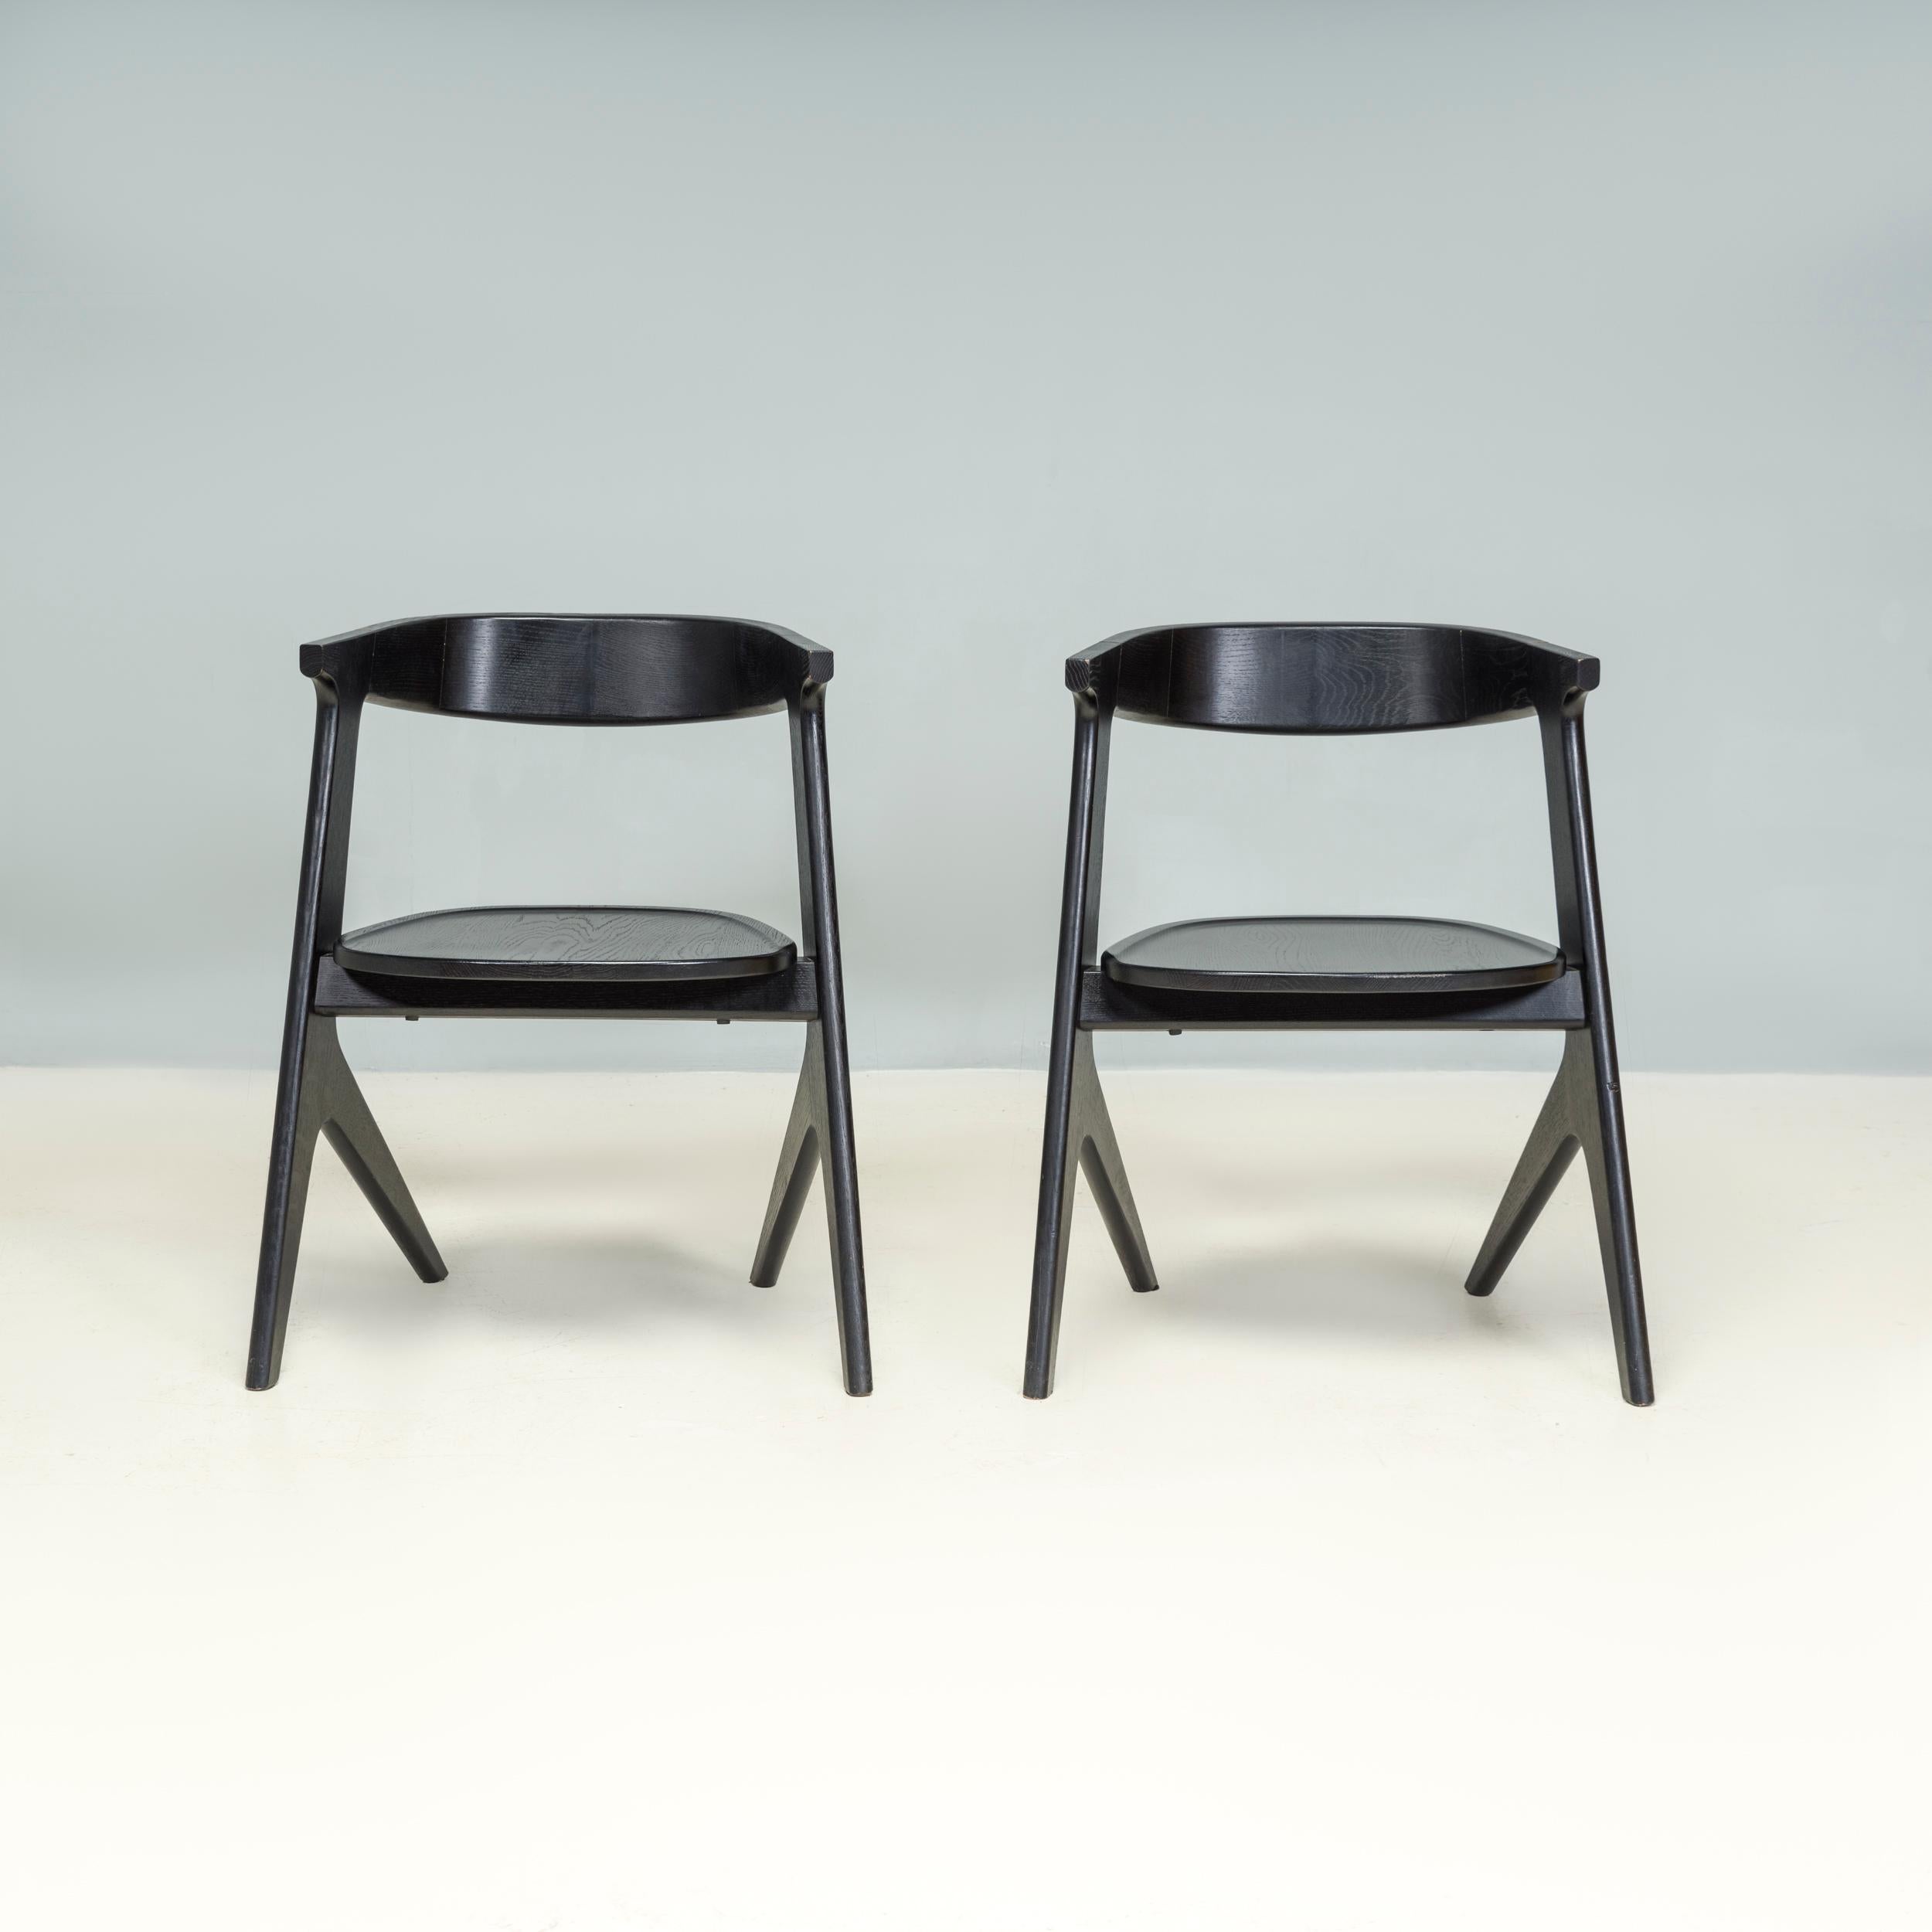 Designed by Tom Dixon, one of the best known British designers of the 21st century, the Slab collection combines quality materials with a sleek aesthetic. 

The brief for the Slab chair design was ‘modern yet looking like it had always existed’,